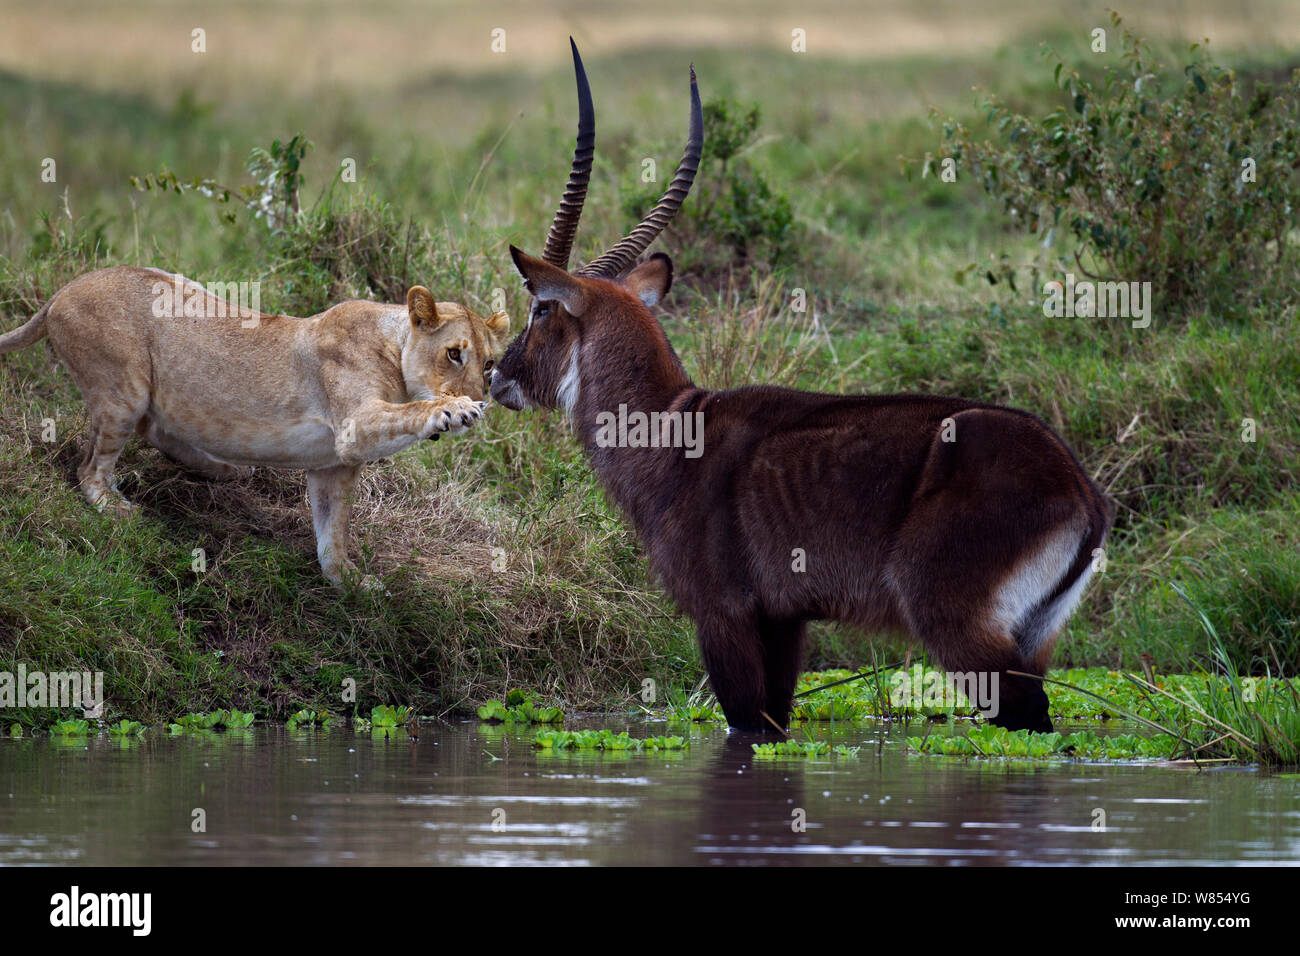 Defassa waterbuck (Kobus ellipsiprymnus defassa) male standing in a lake surrounded by a pride of African lions (Panthera leo), Masai Mara National Reserve, Kenya, September sequence 6/11 Stock Photo